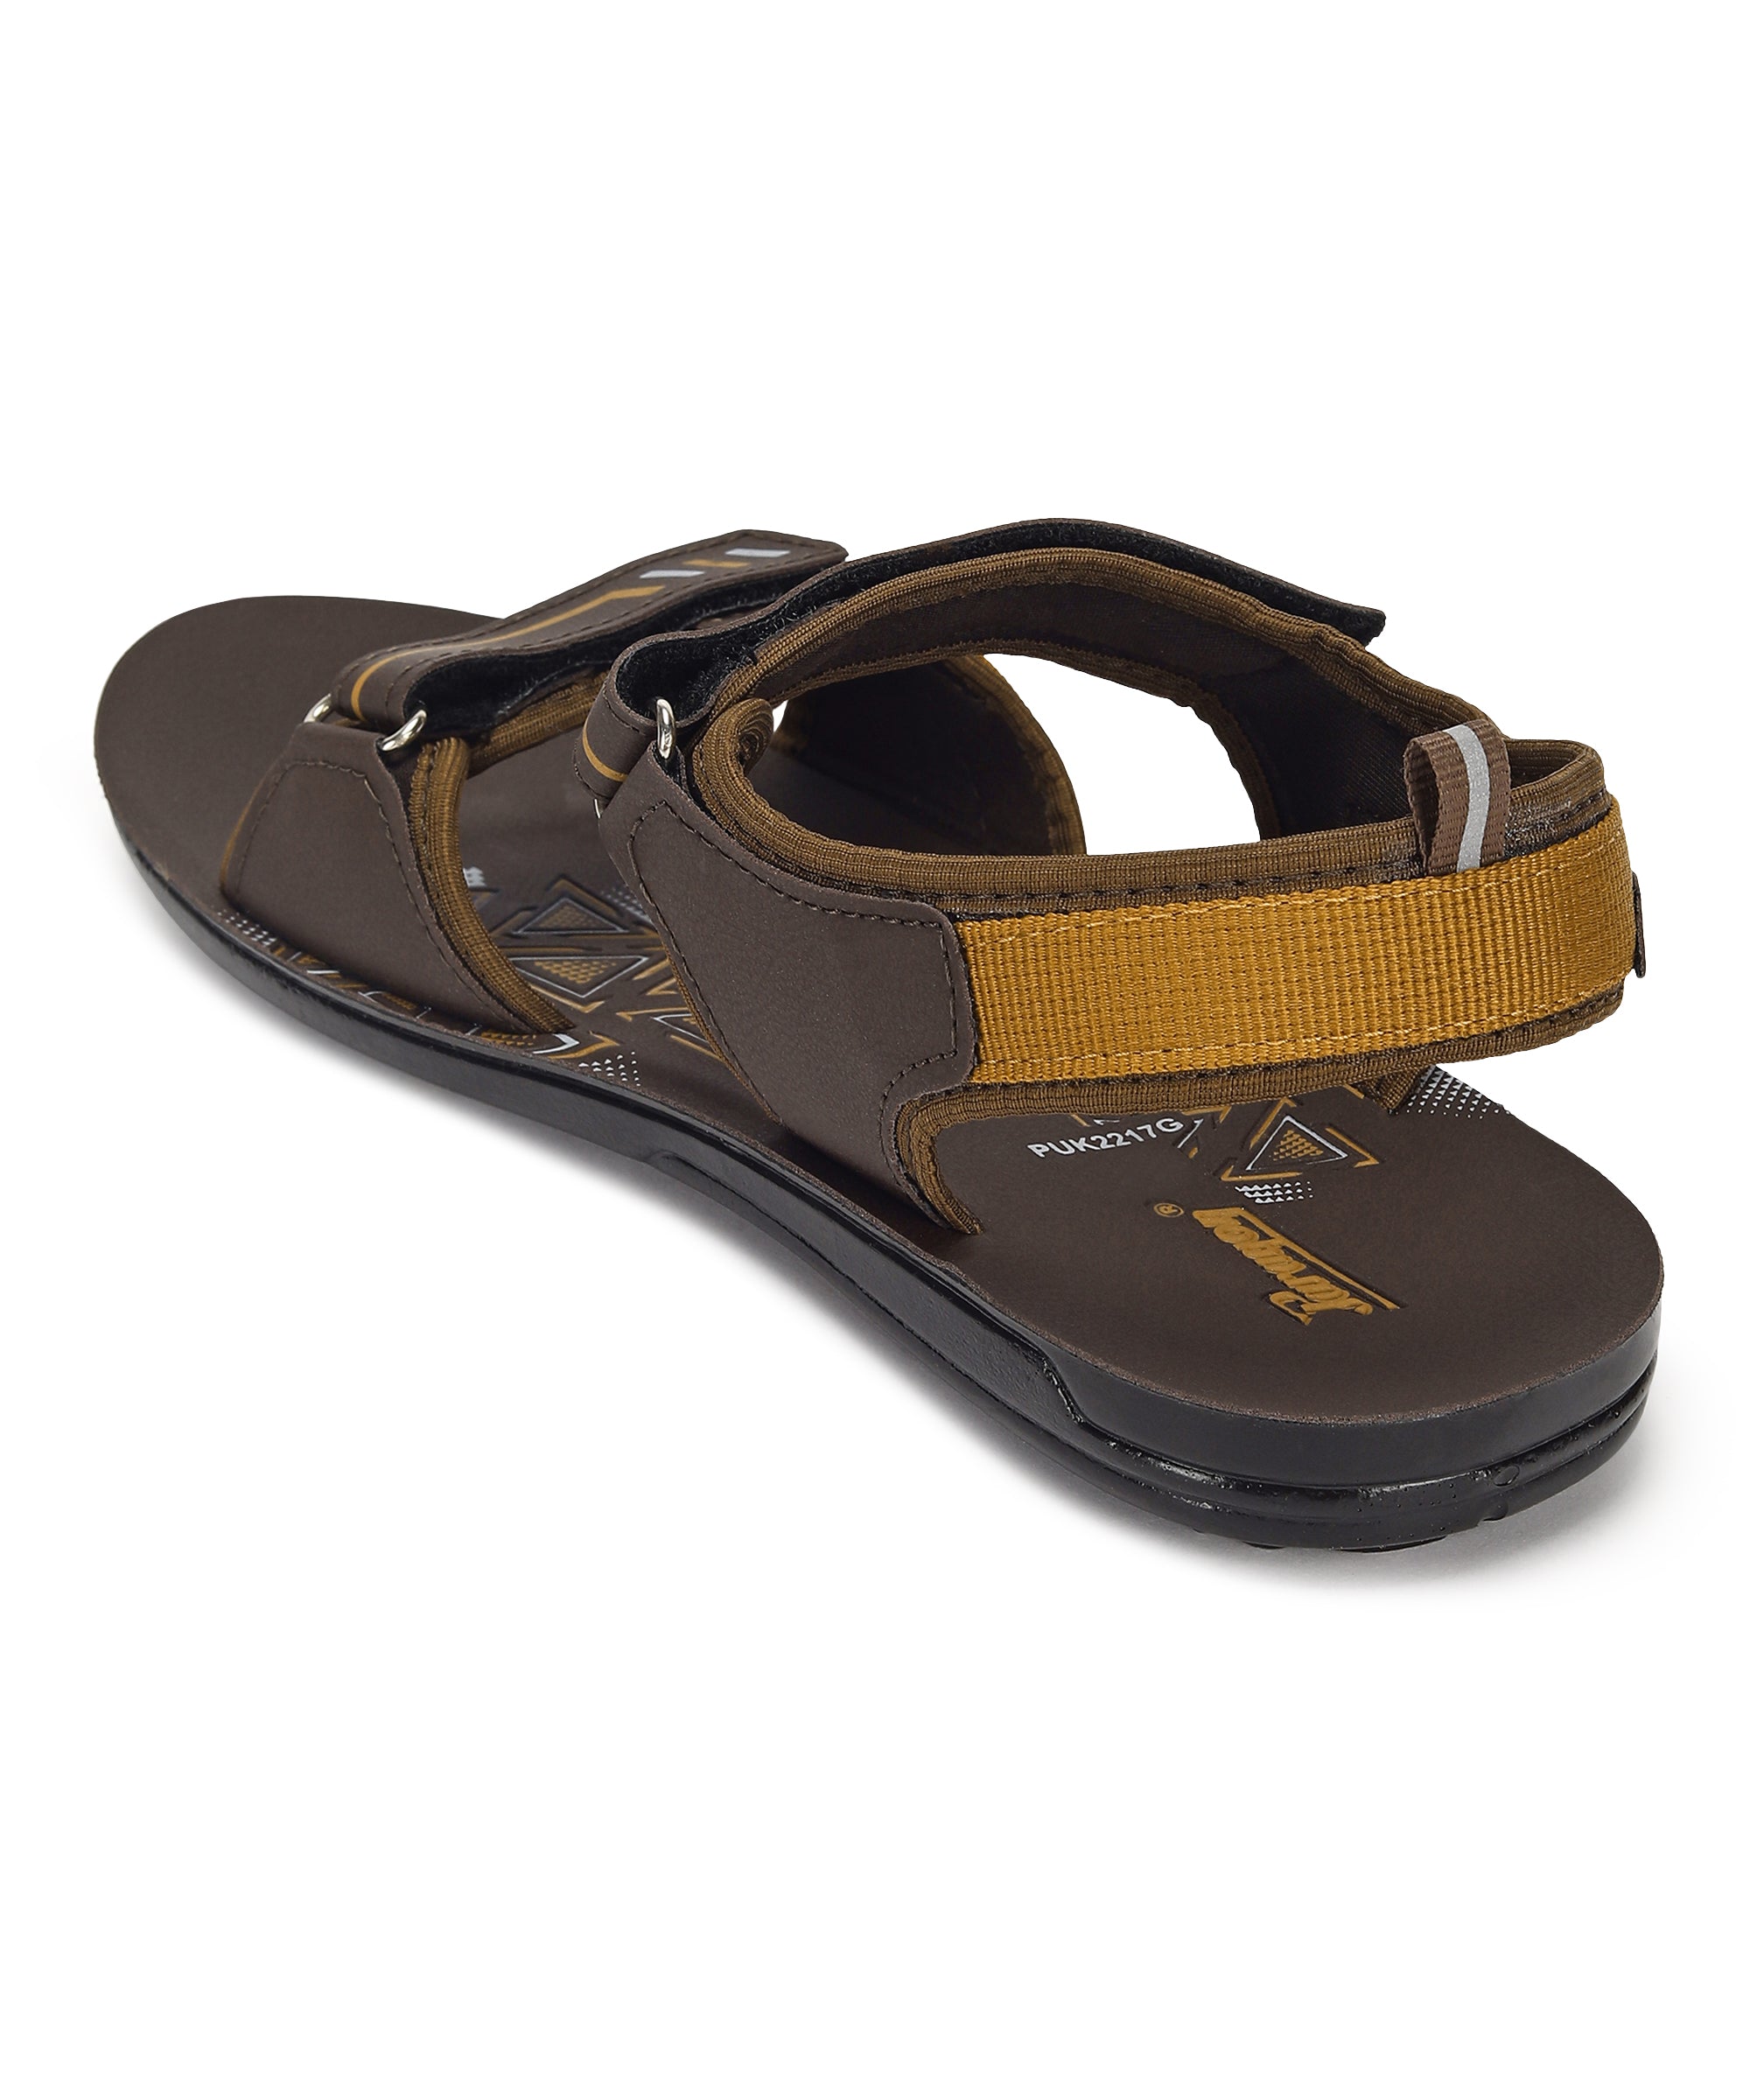 Paragon PUK2217G Men Stylish Velcro Sandals | Comfortable Sporty Sandals for Daily Outdoor Use | Casual Athletic Sandals with Cushioned Soles